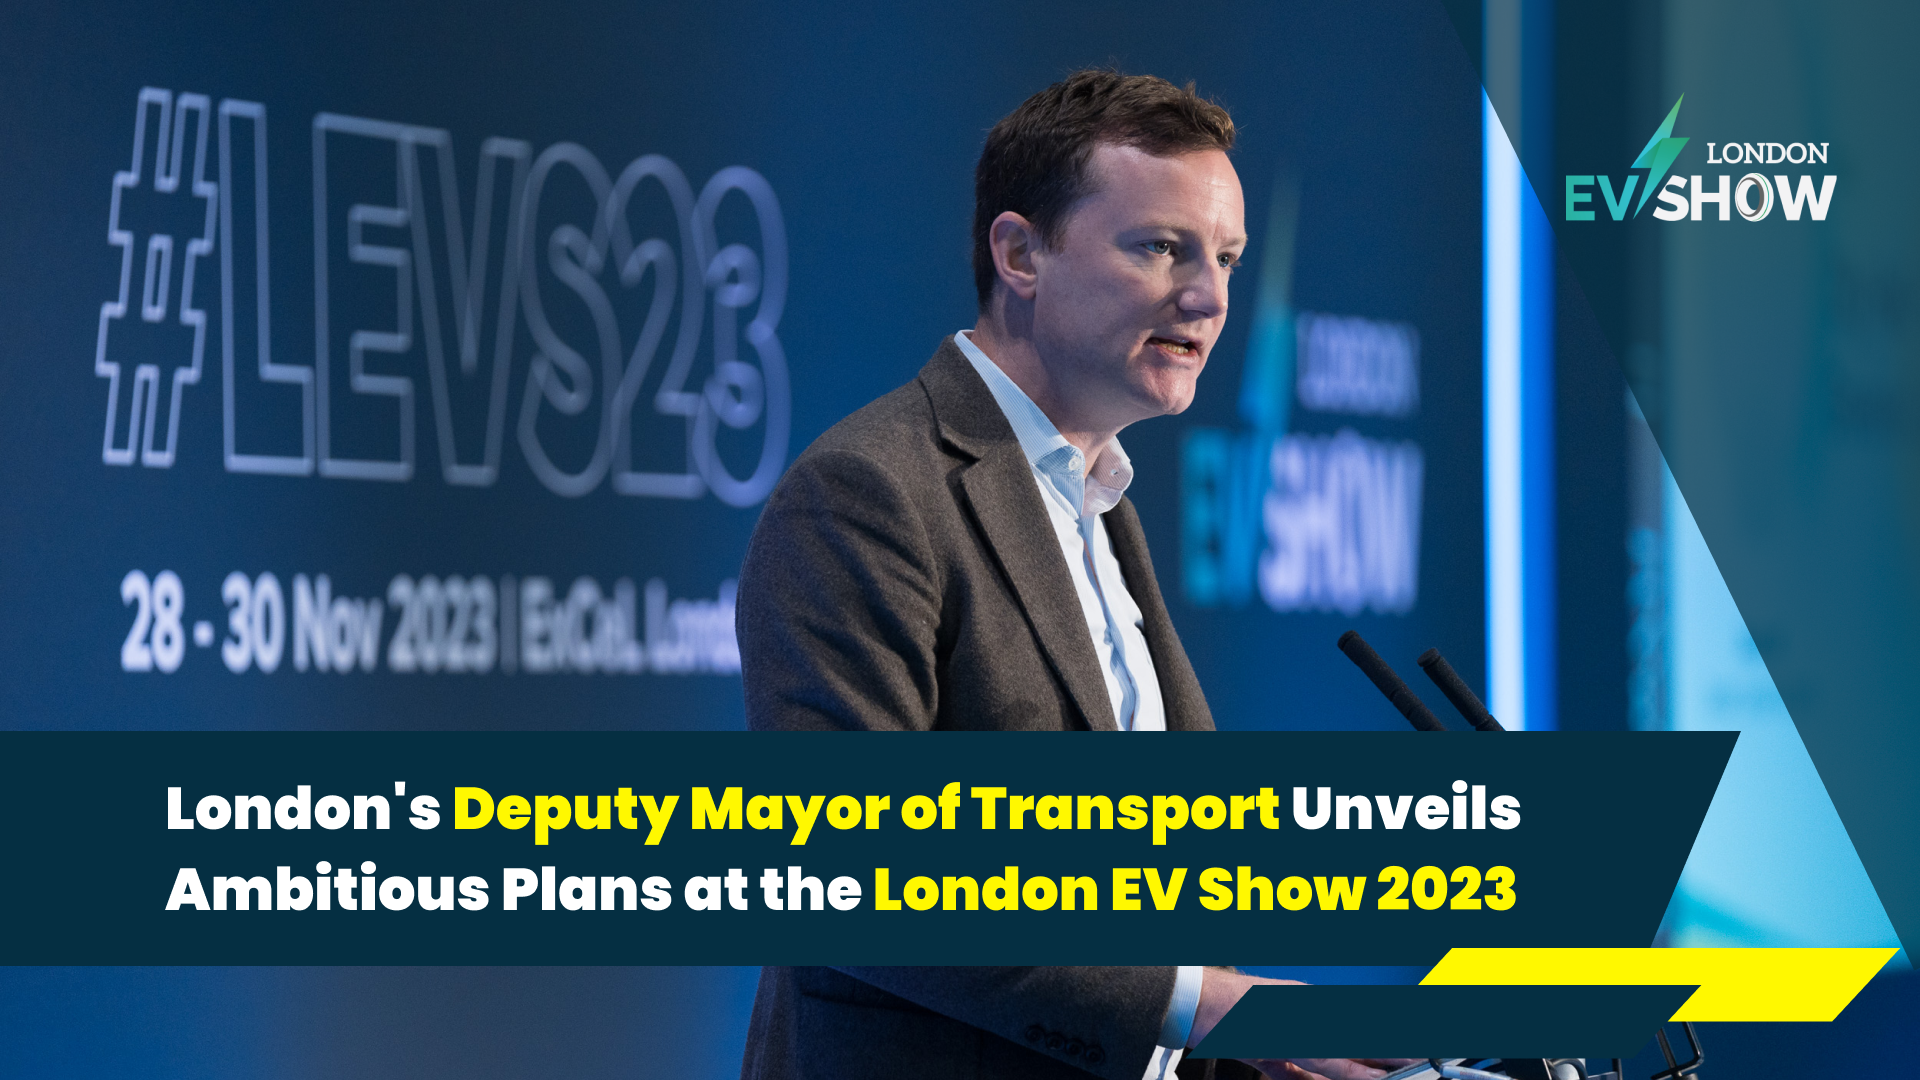 London's Deputy Mayor of Transport Unveils Ambitious Plans at the London EV Show 2023